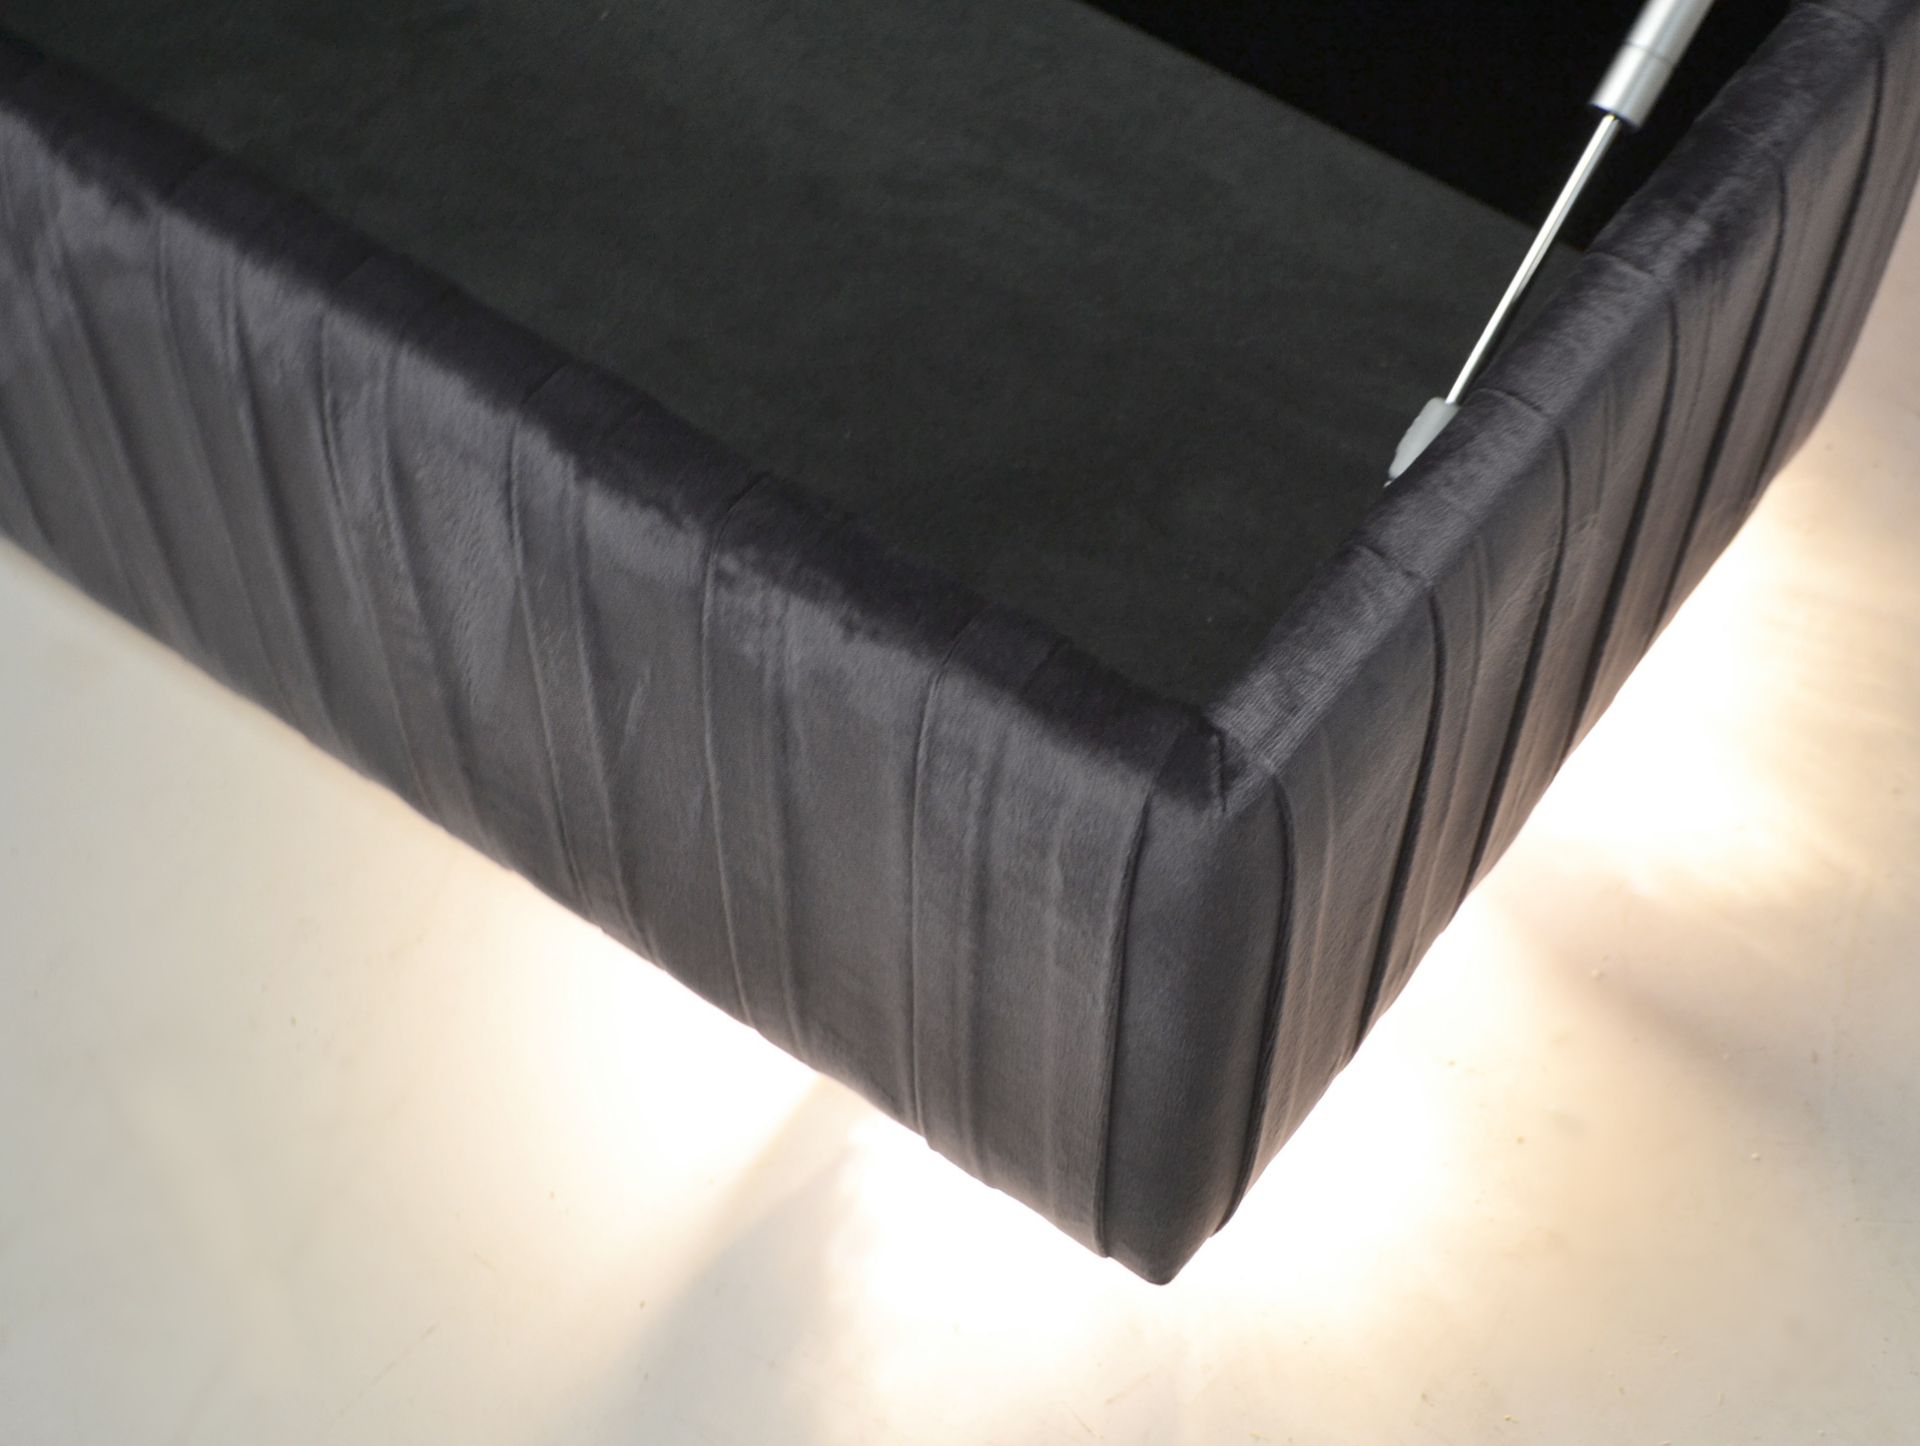 1 x REFLEX 'Plisse' Pleated Ottoman / Bedroom Bench In Plum With 'Illuminated' Spherical Glass Feet - Image 10 of 11